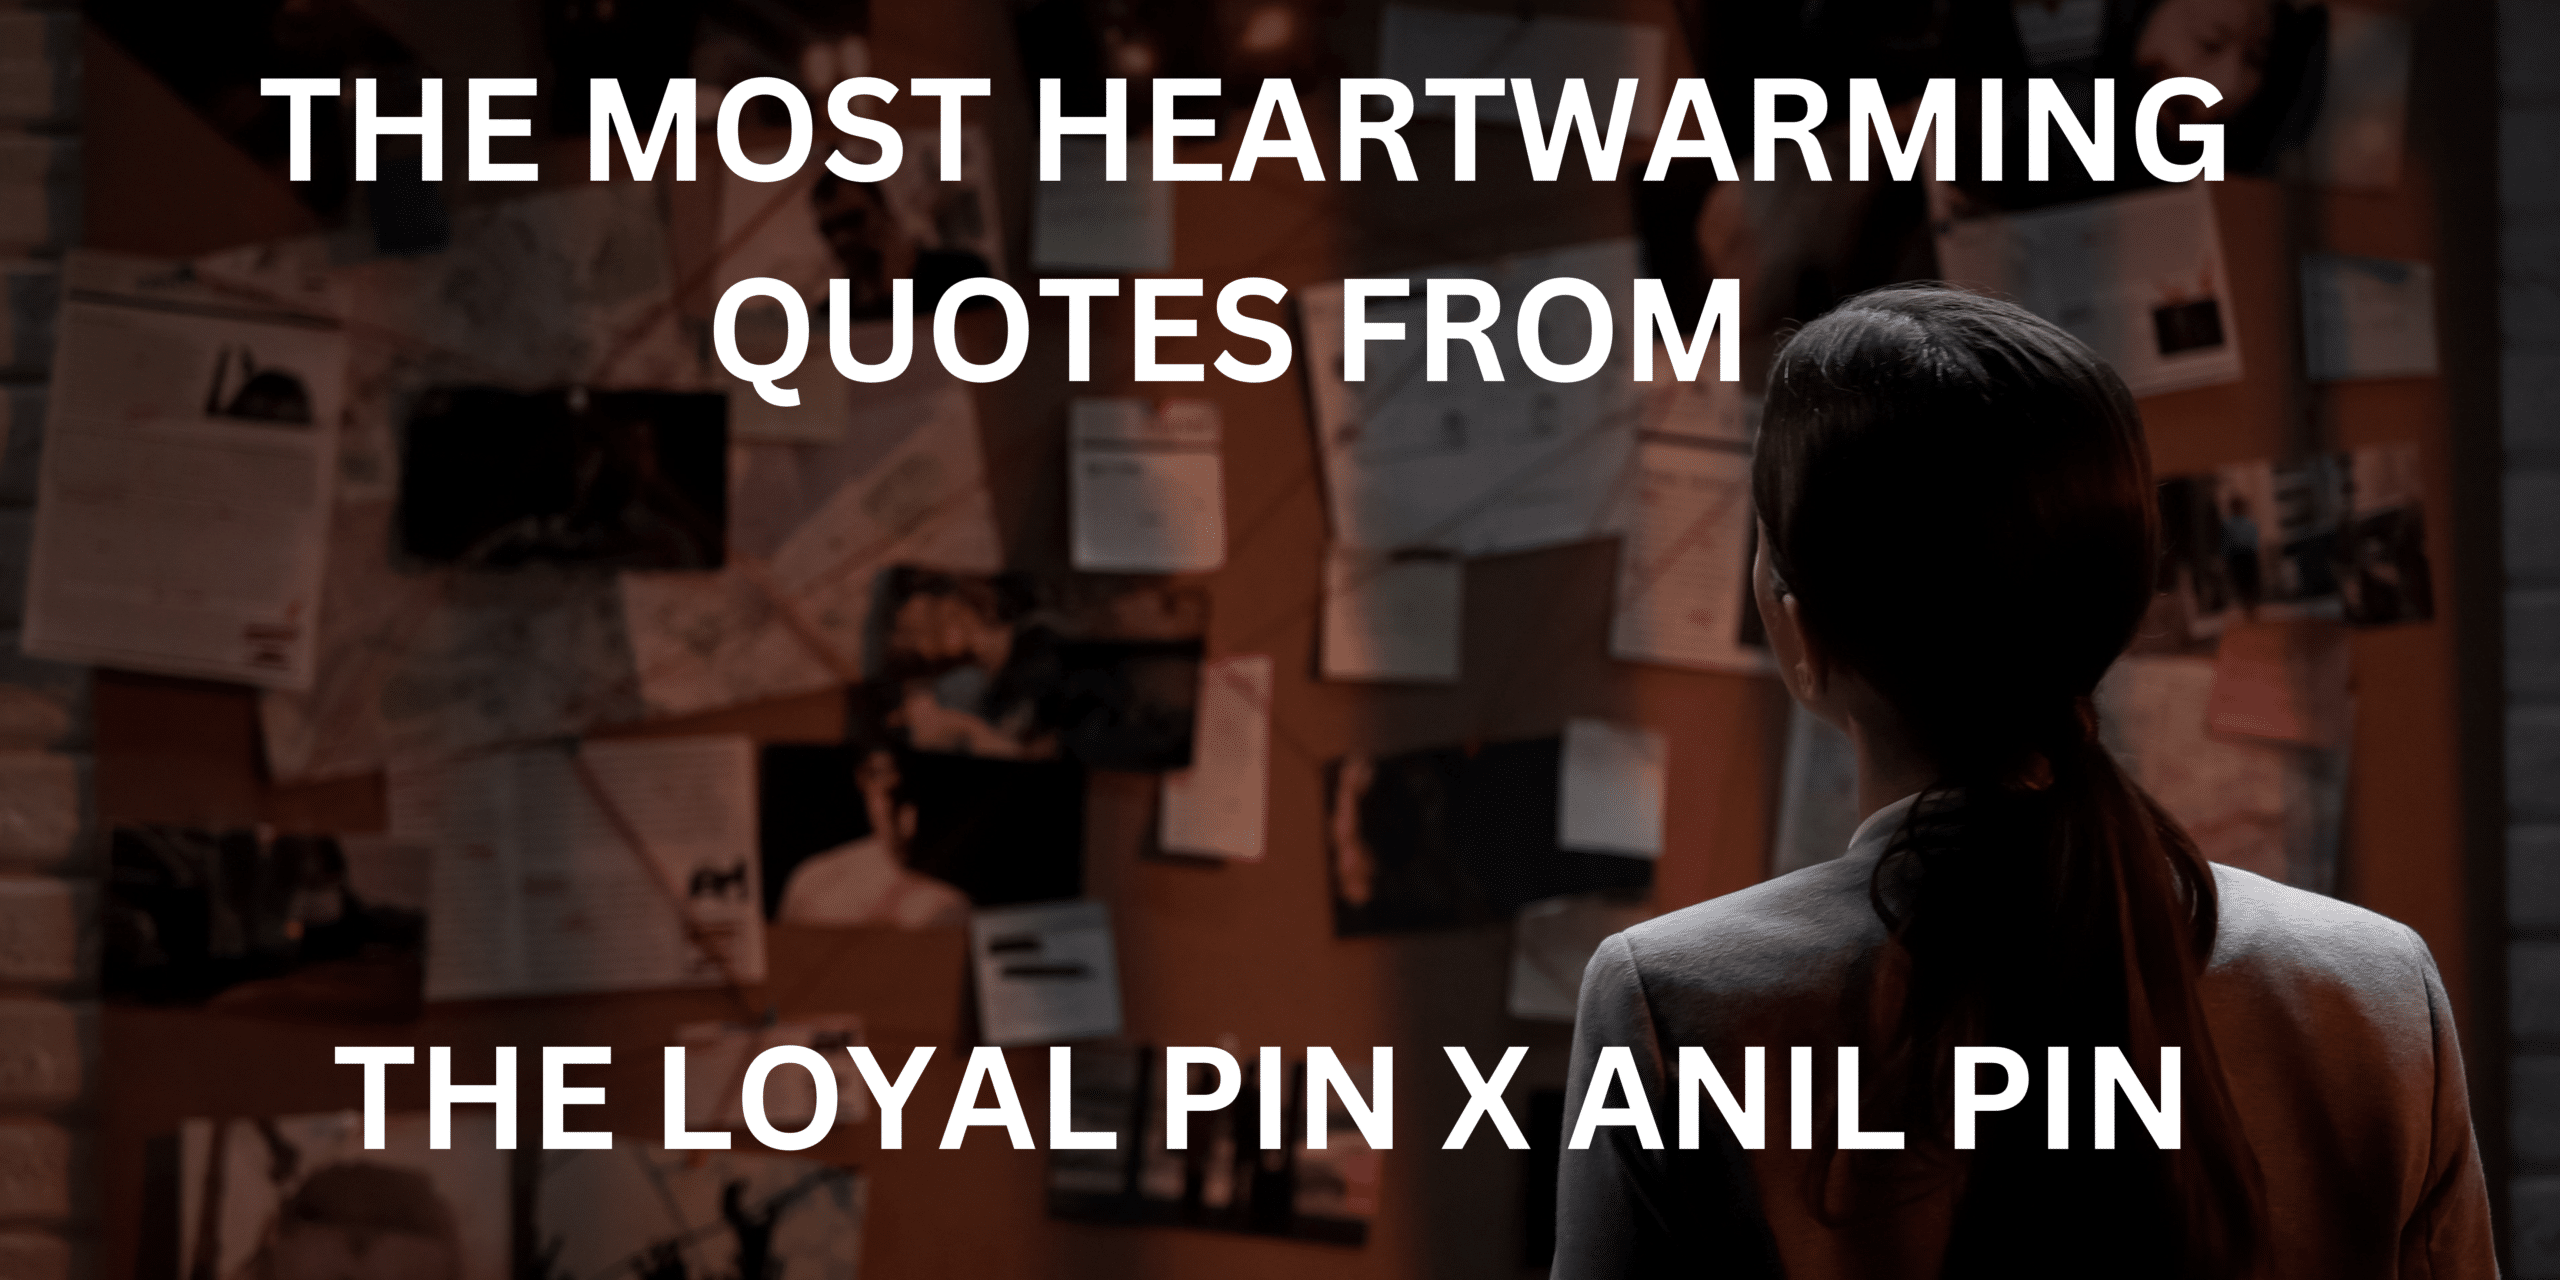 The most heartwarming quotes from THE LOYAL PIN X ANIL PIN